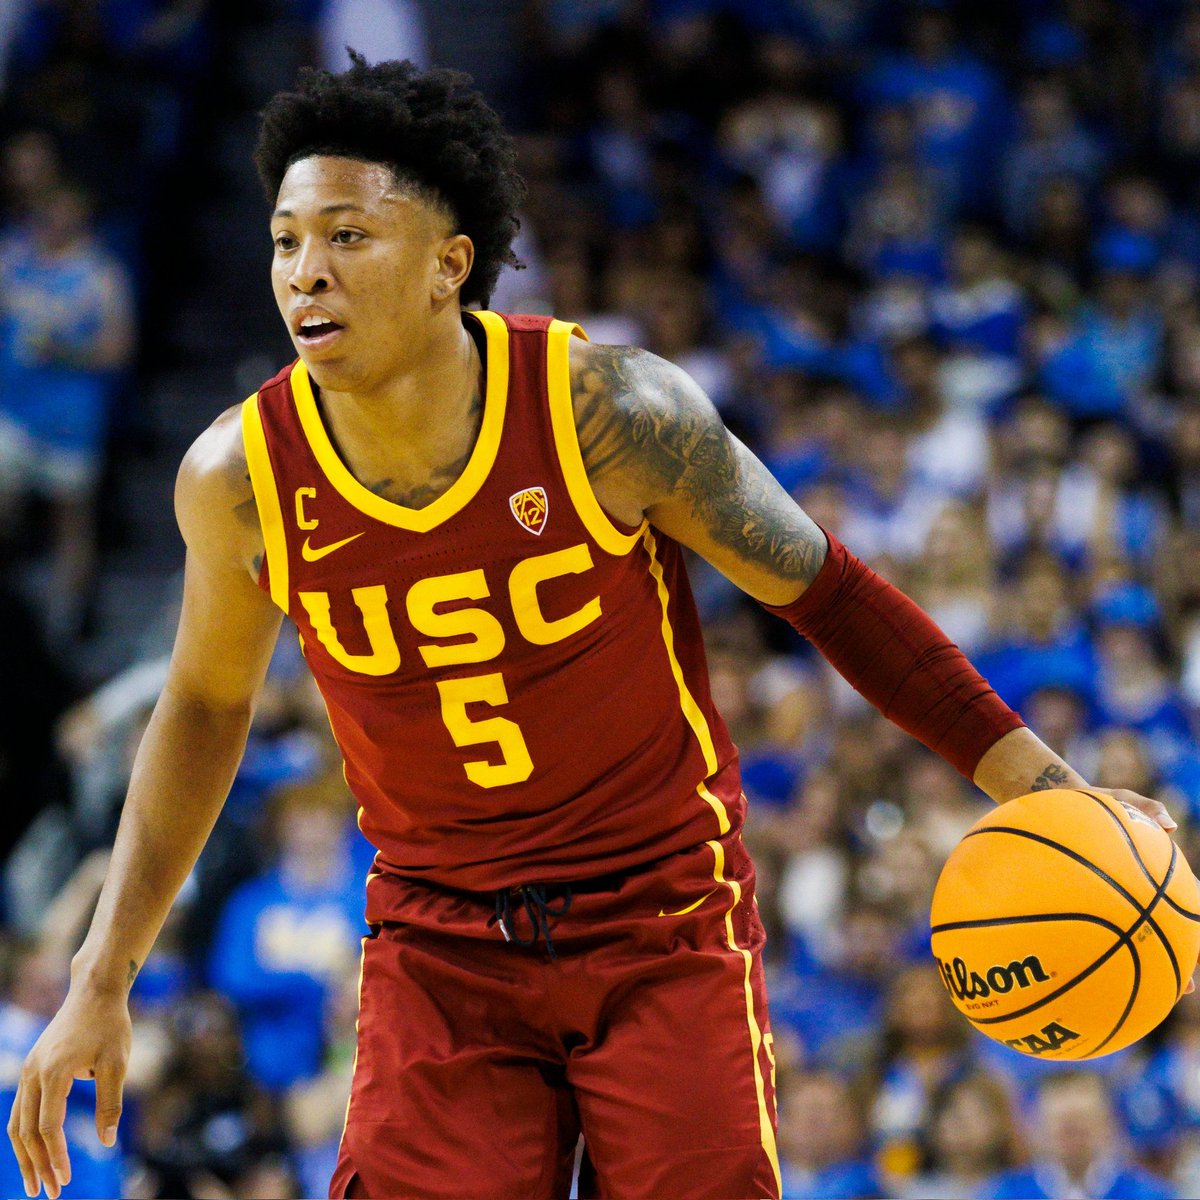 NEWS: USC's Boogie Ellis has been called up to the NBA Draft Combine from the G League Elite Camp, a source told ESPN. Ellis was a late invite to Chicago, but proved he more than belonged and now levels up.